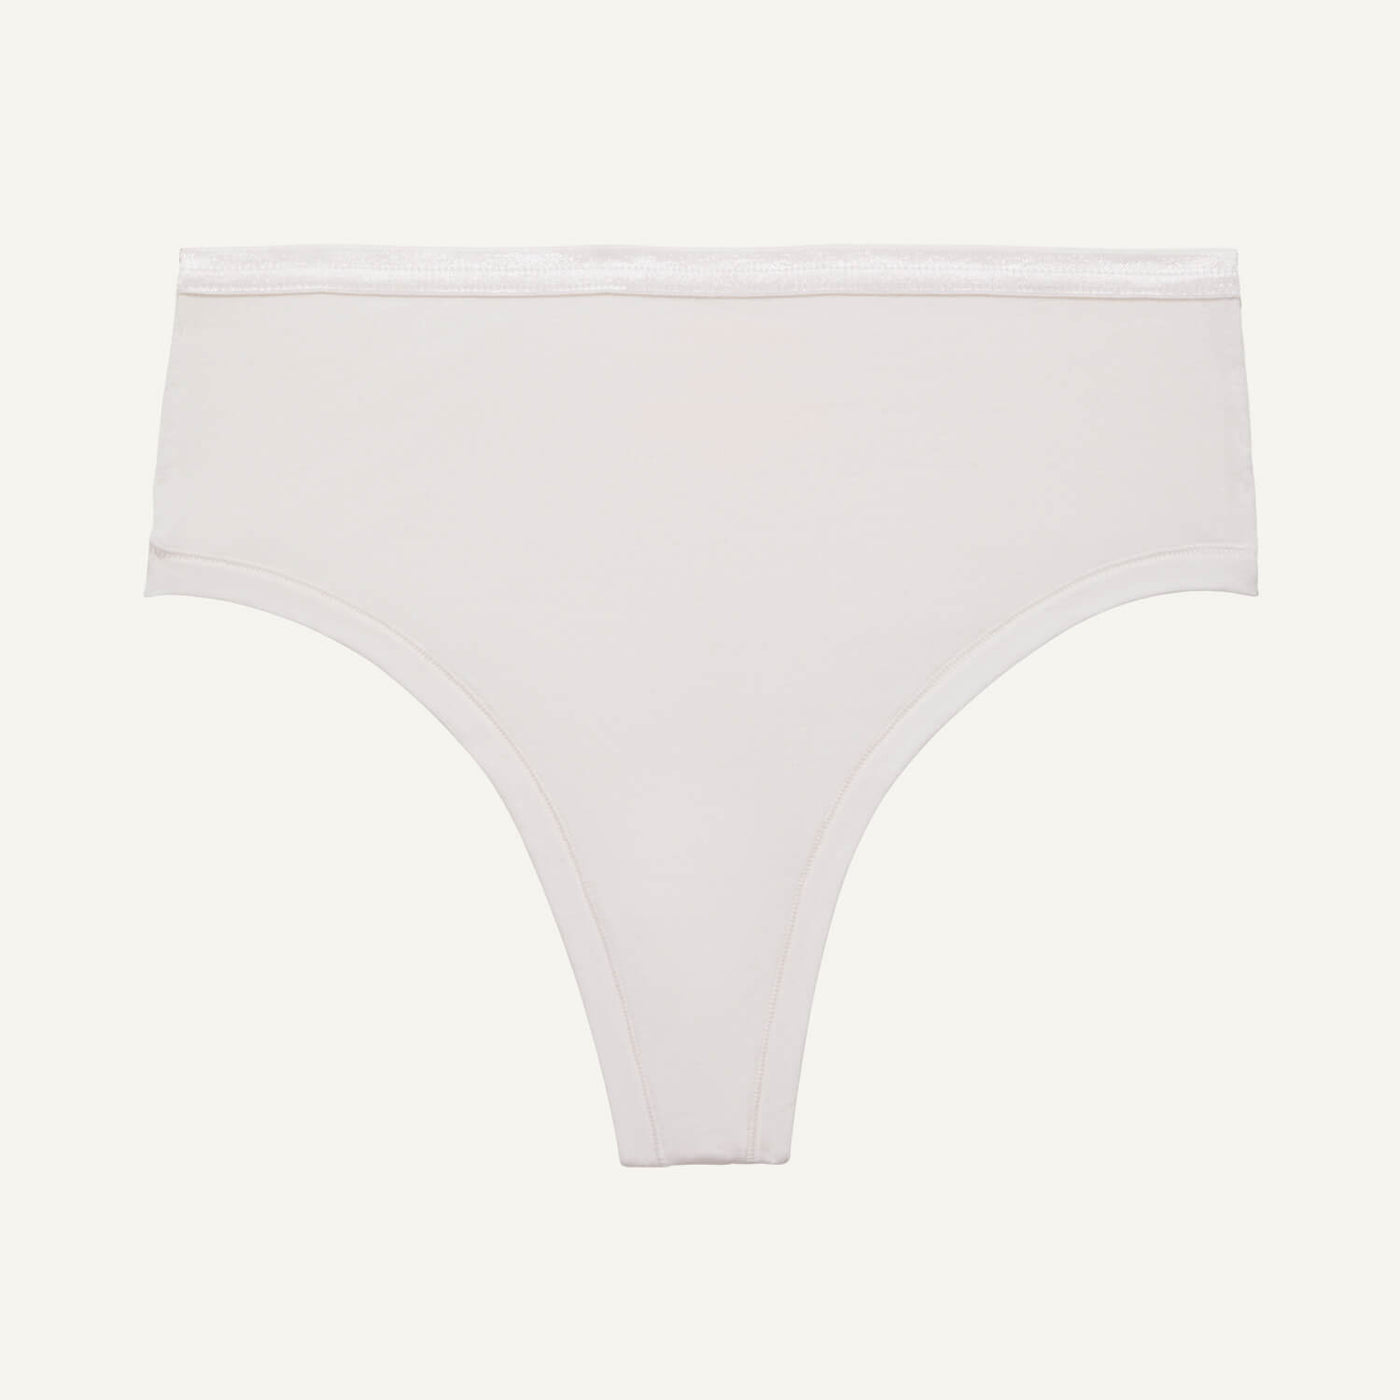 SO INTIMATES Junior's Size 11-13 LARGE Bonded Cotton WHITE THONG Panty  #SO83-005